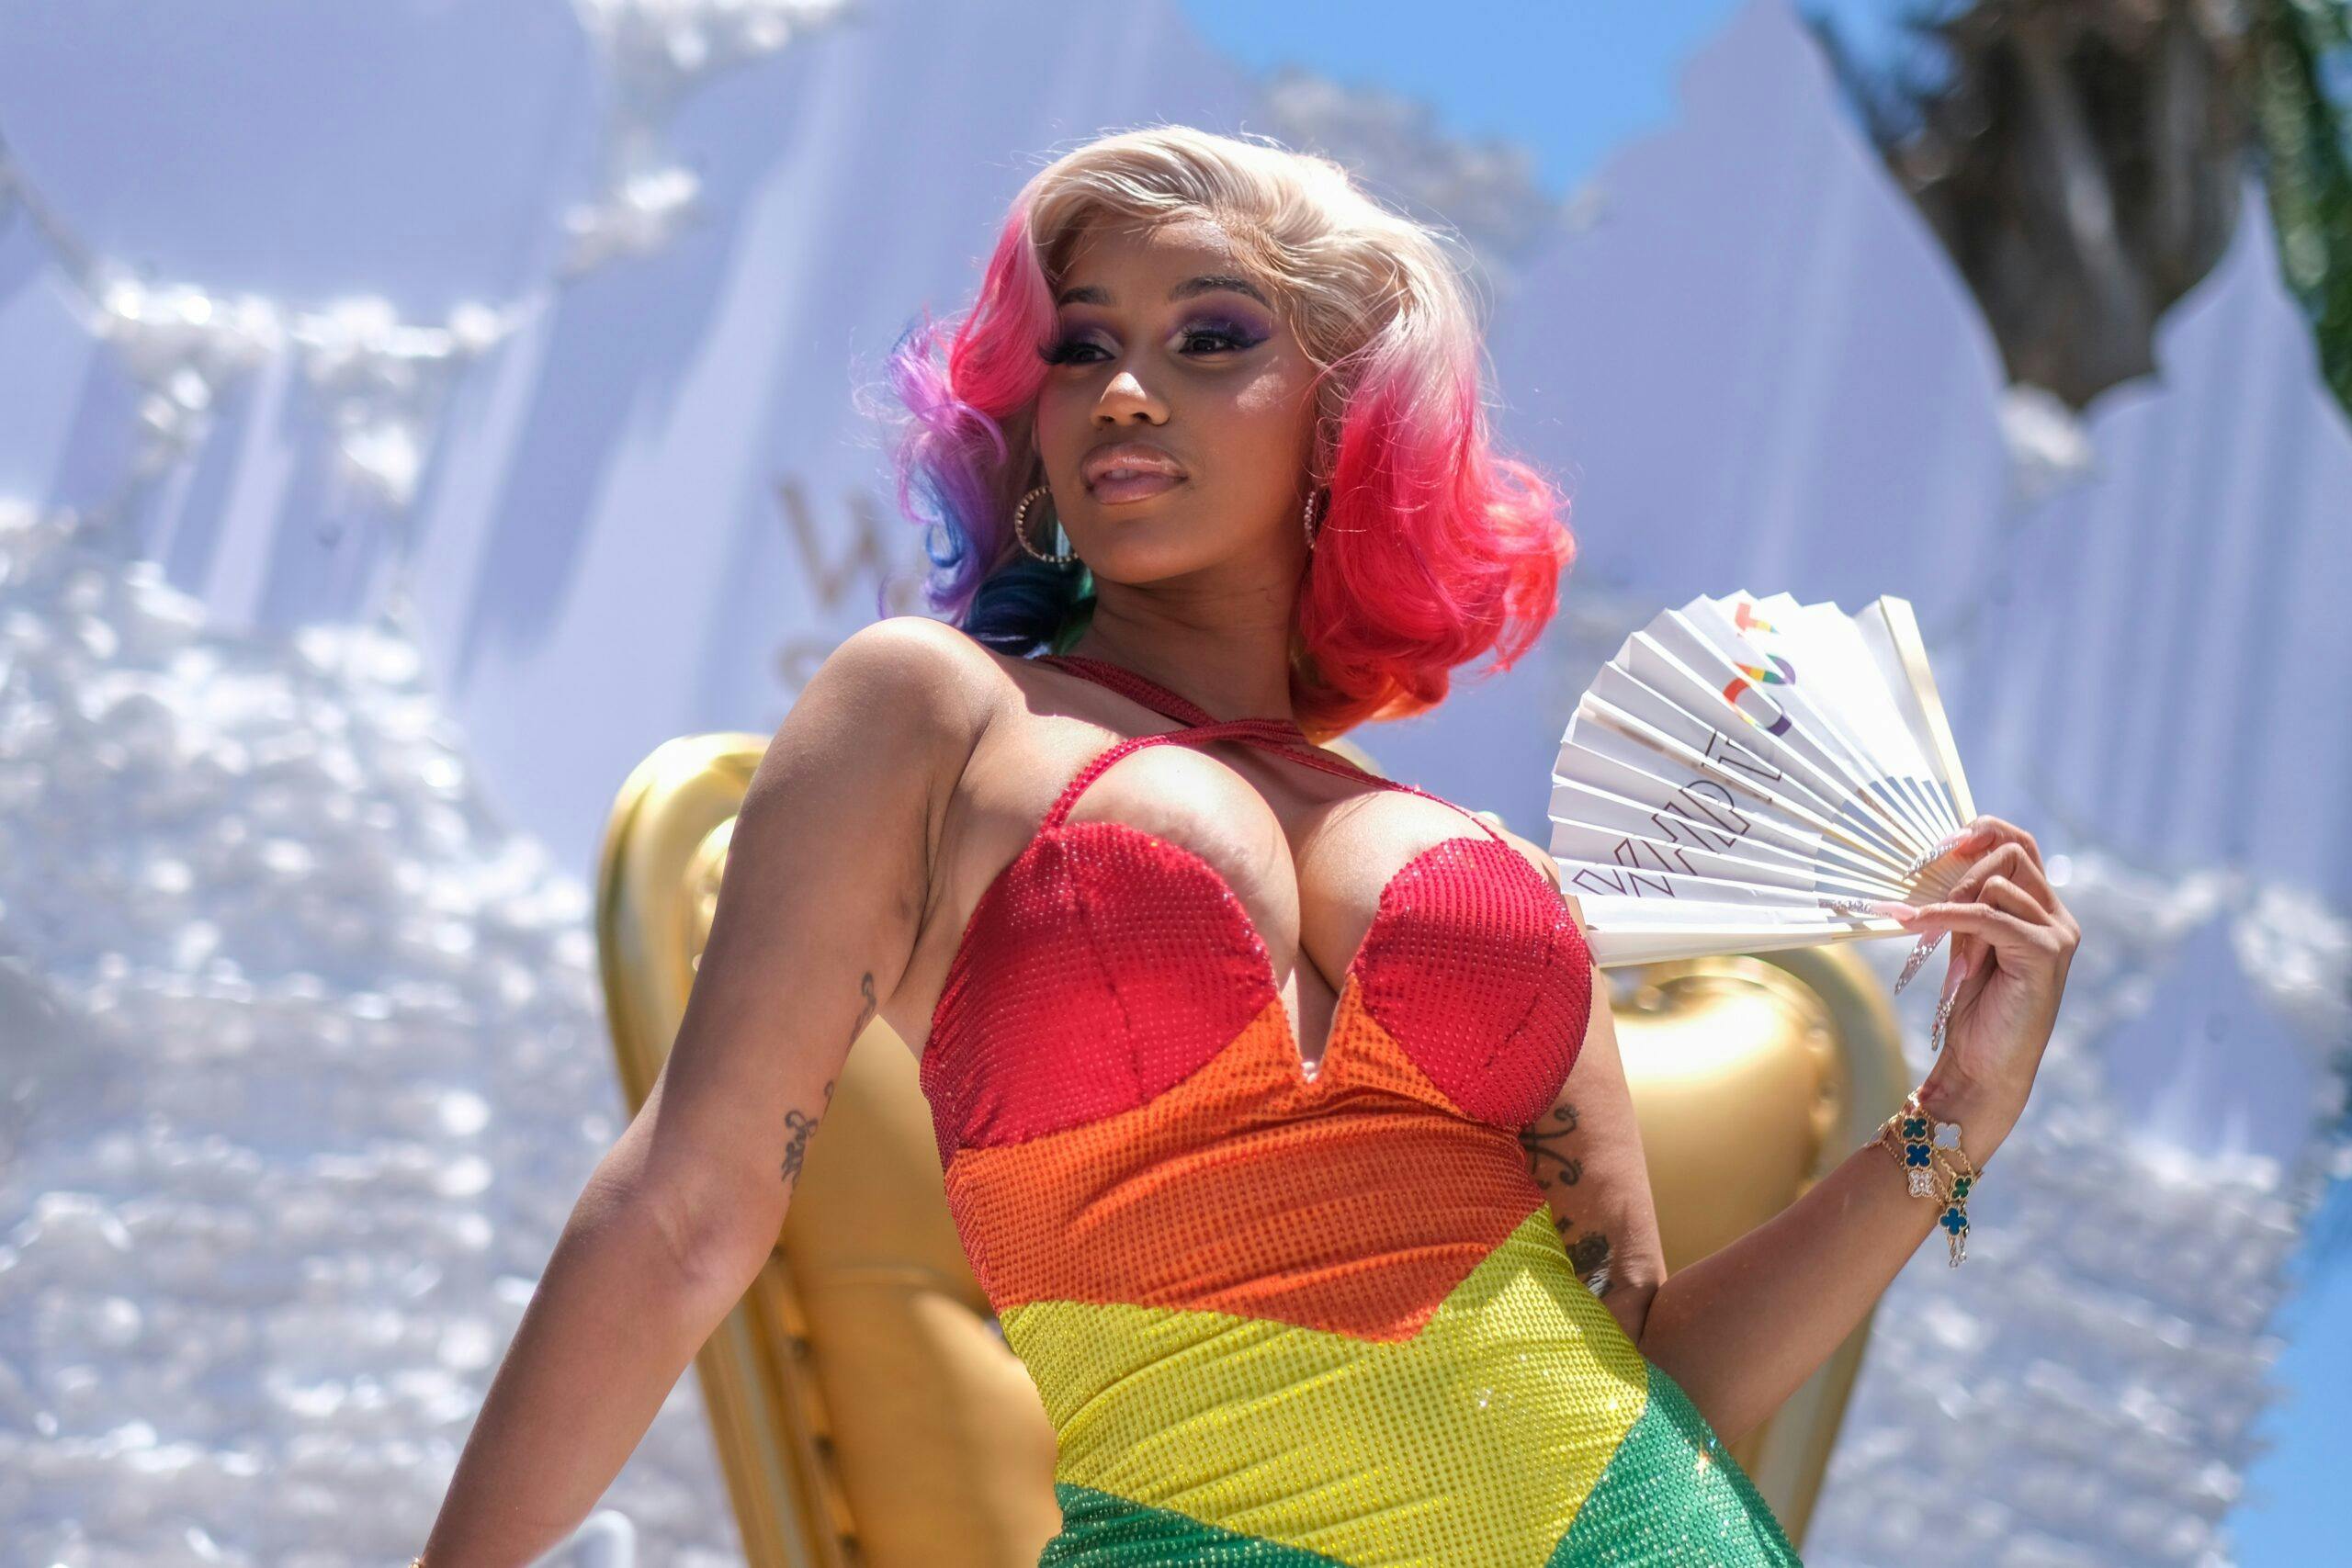 Cardi B attends the WEHO Pride Parade in West Hollywood on Sunday June 5, 2022, dressed in a rainbow dress and holding a fan.
